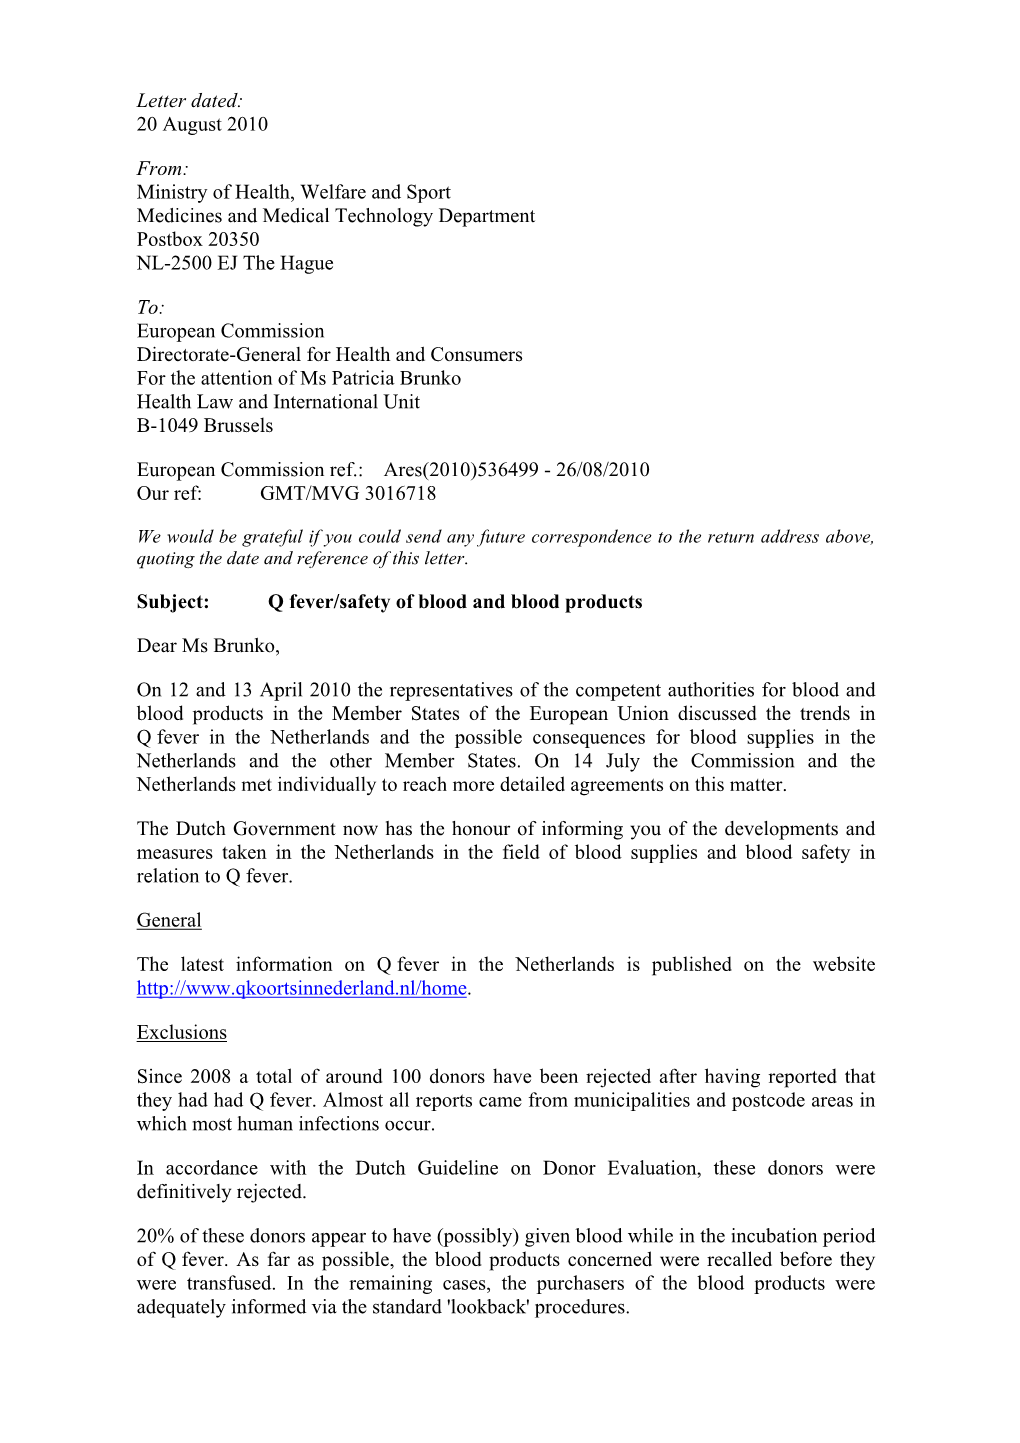 Letter Dated: 20 August 2010 From: Ministry of Health, Welfare And